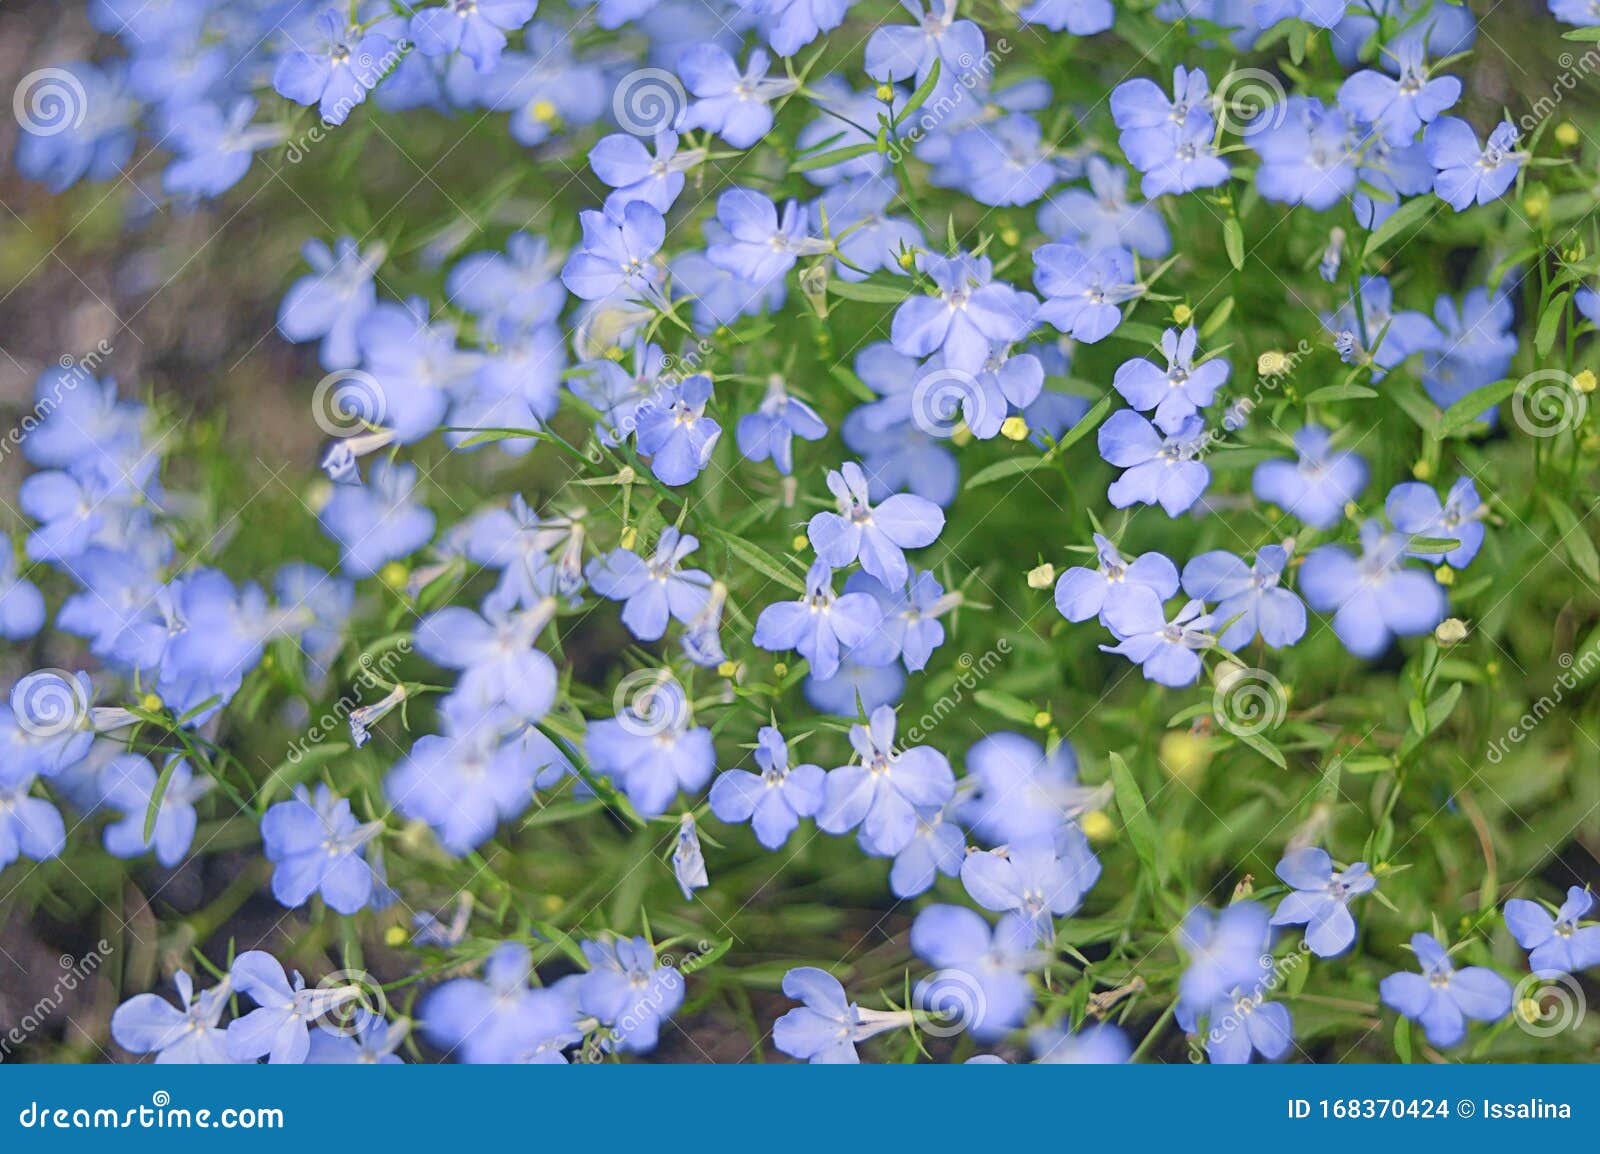 Blue Summer Flowers Close Up Stock Photo - Image of blur, flower: 168370424